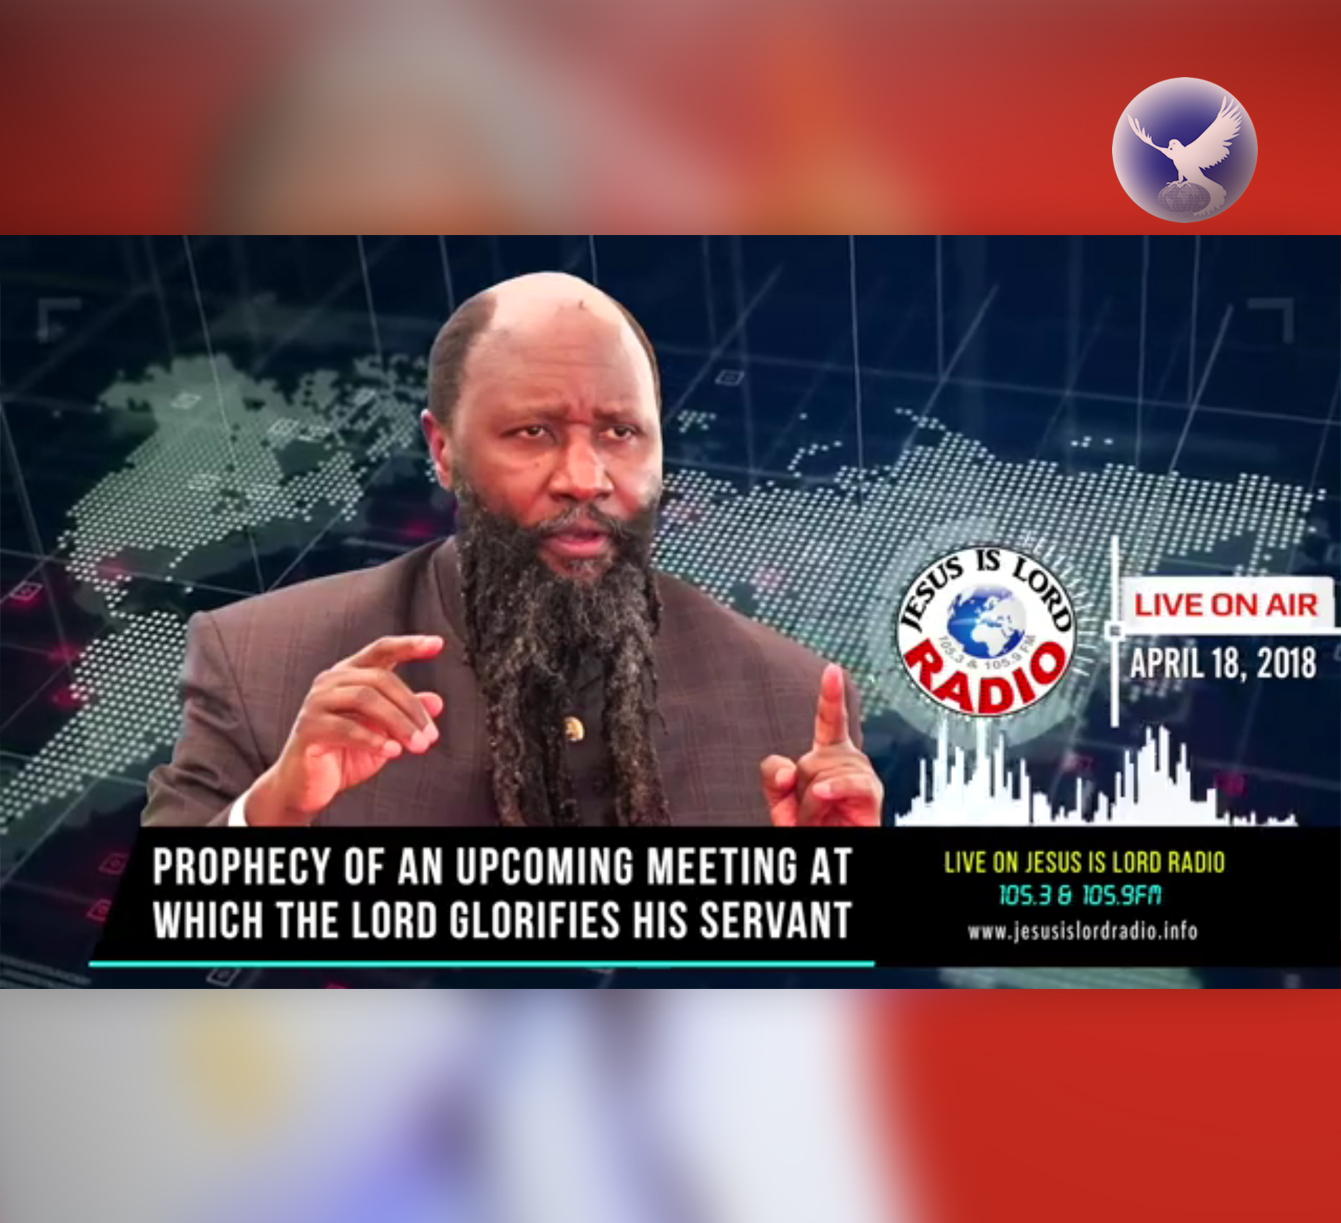 EPISODE 181 - Prophecy of An Upcoming Meeting At Which THE LORD Glorifies HIS SERVANT (18Apr2018) - Prophet Dr. Owuor